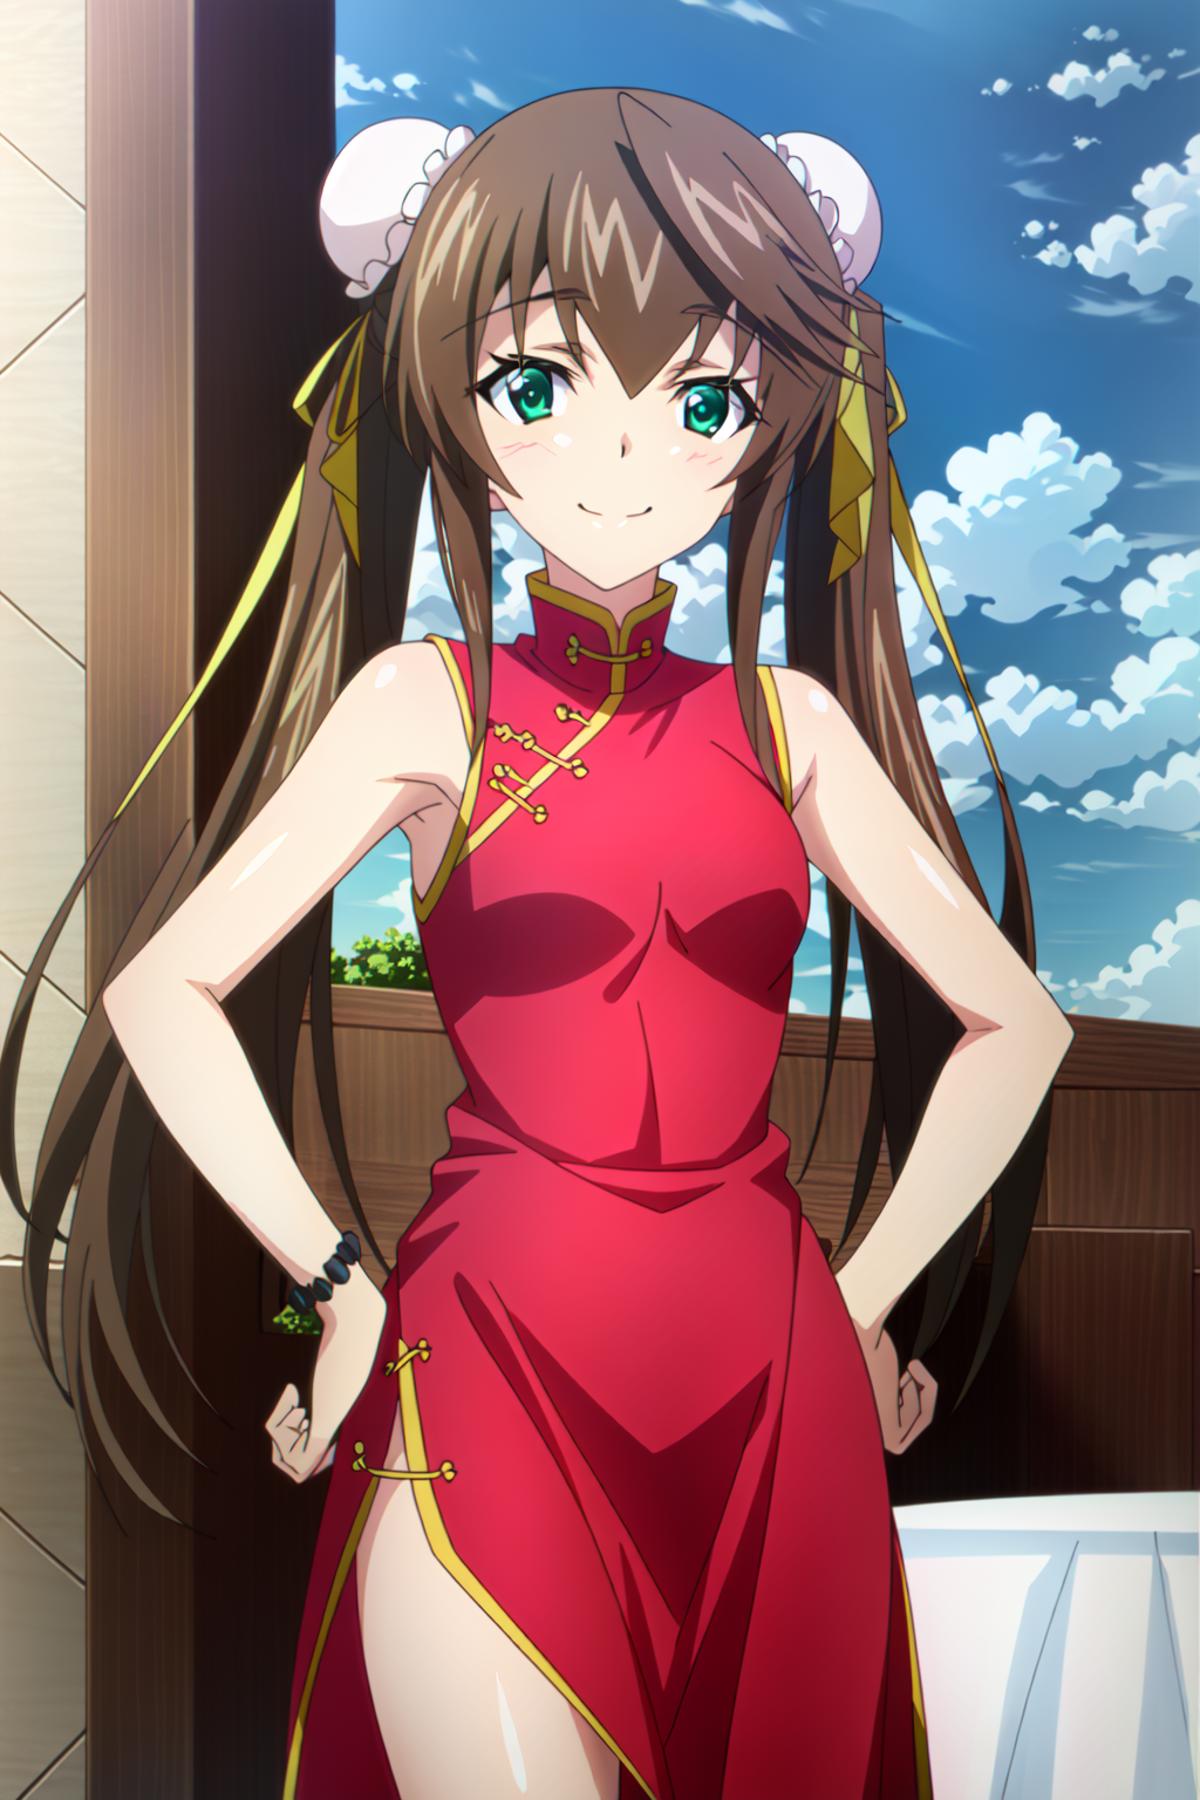 Huang "Rin" Lingyin | Infinite Stratos image by OG_Turles